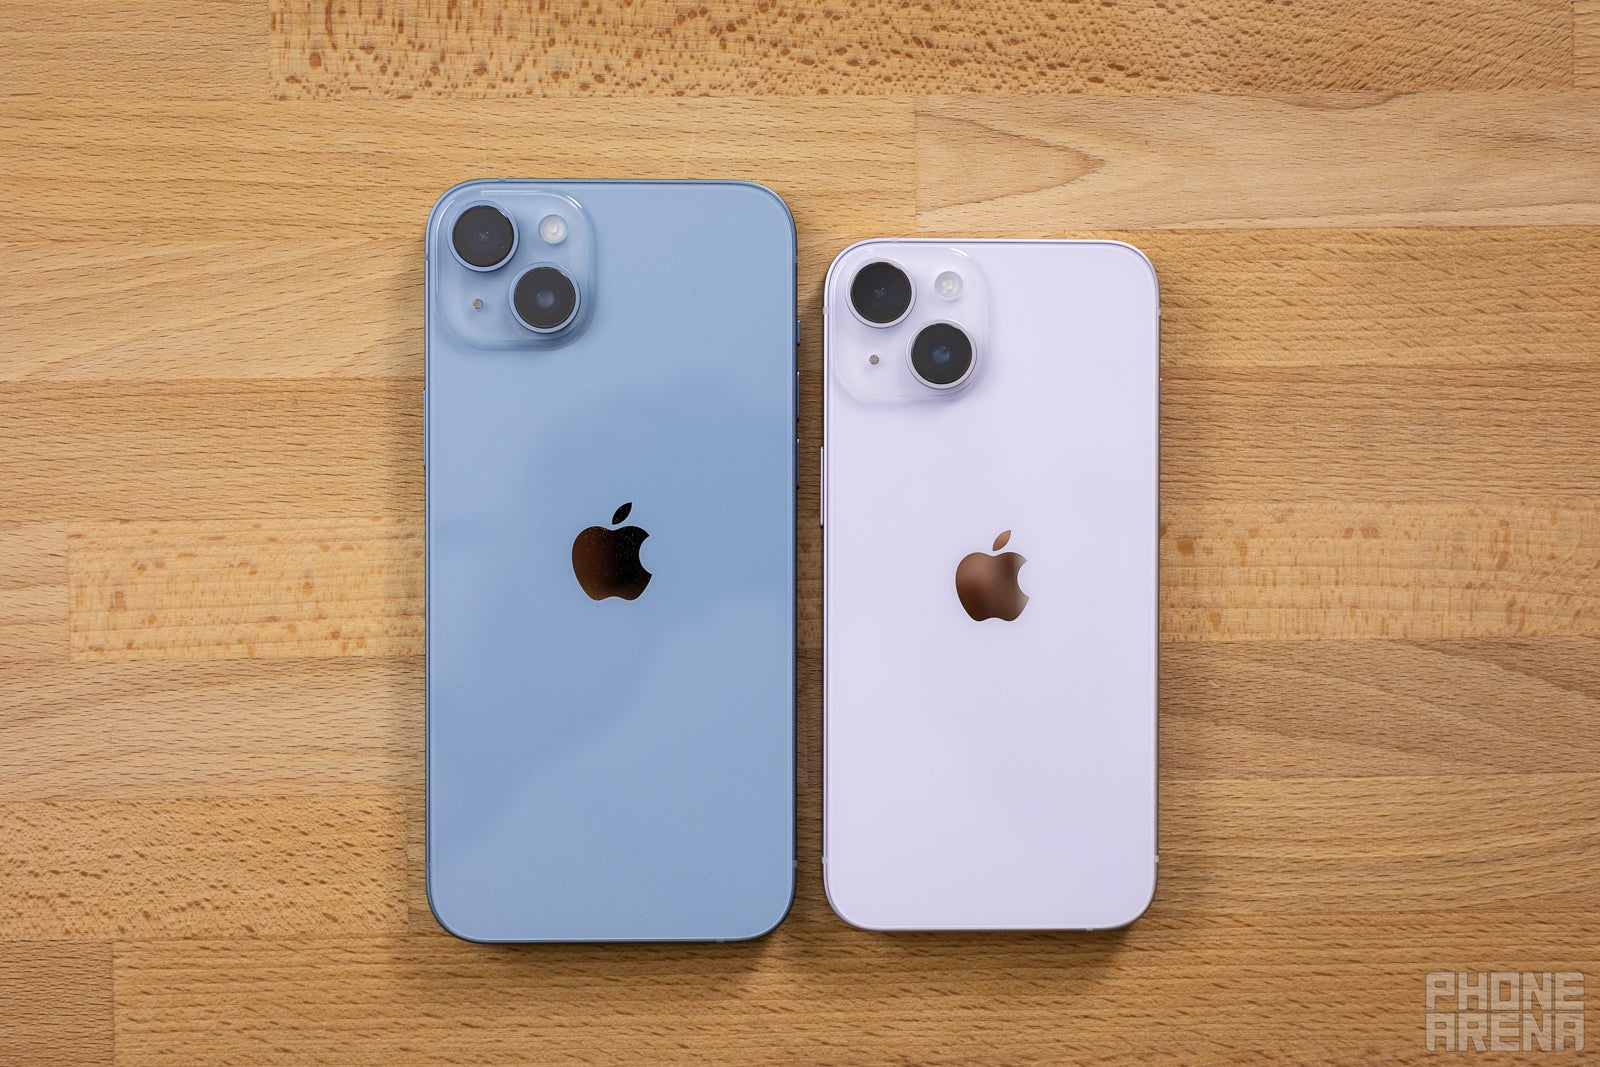 The iPhone 14 and iPhone 14 Plus (Image Credit - PhoneArena) - iPhone 14 vs iPhone 14 Plus: key differences